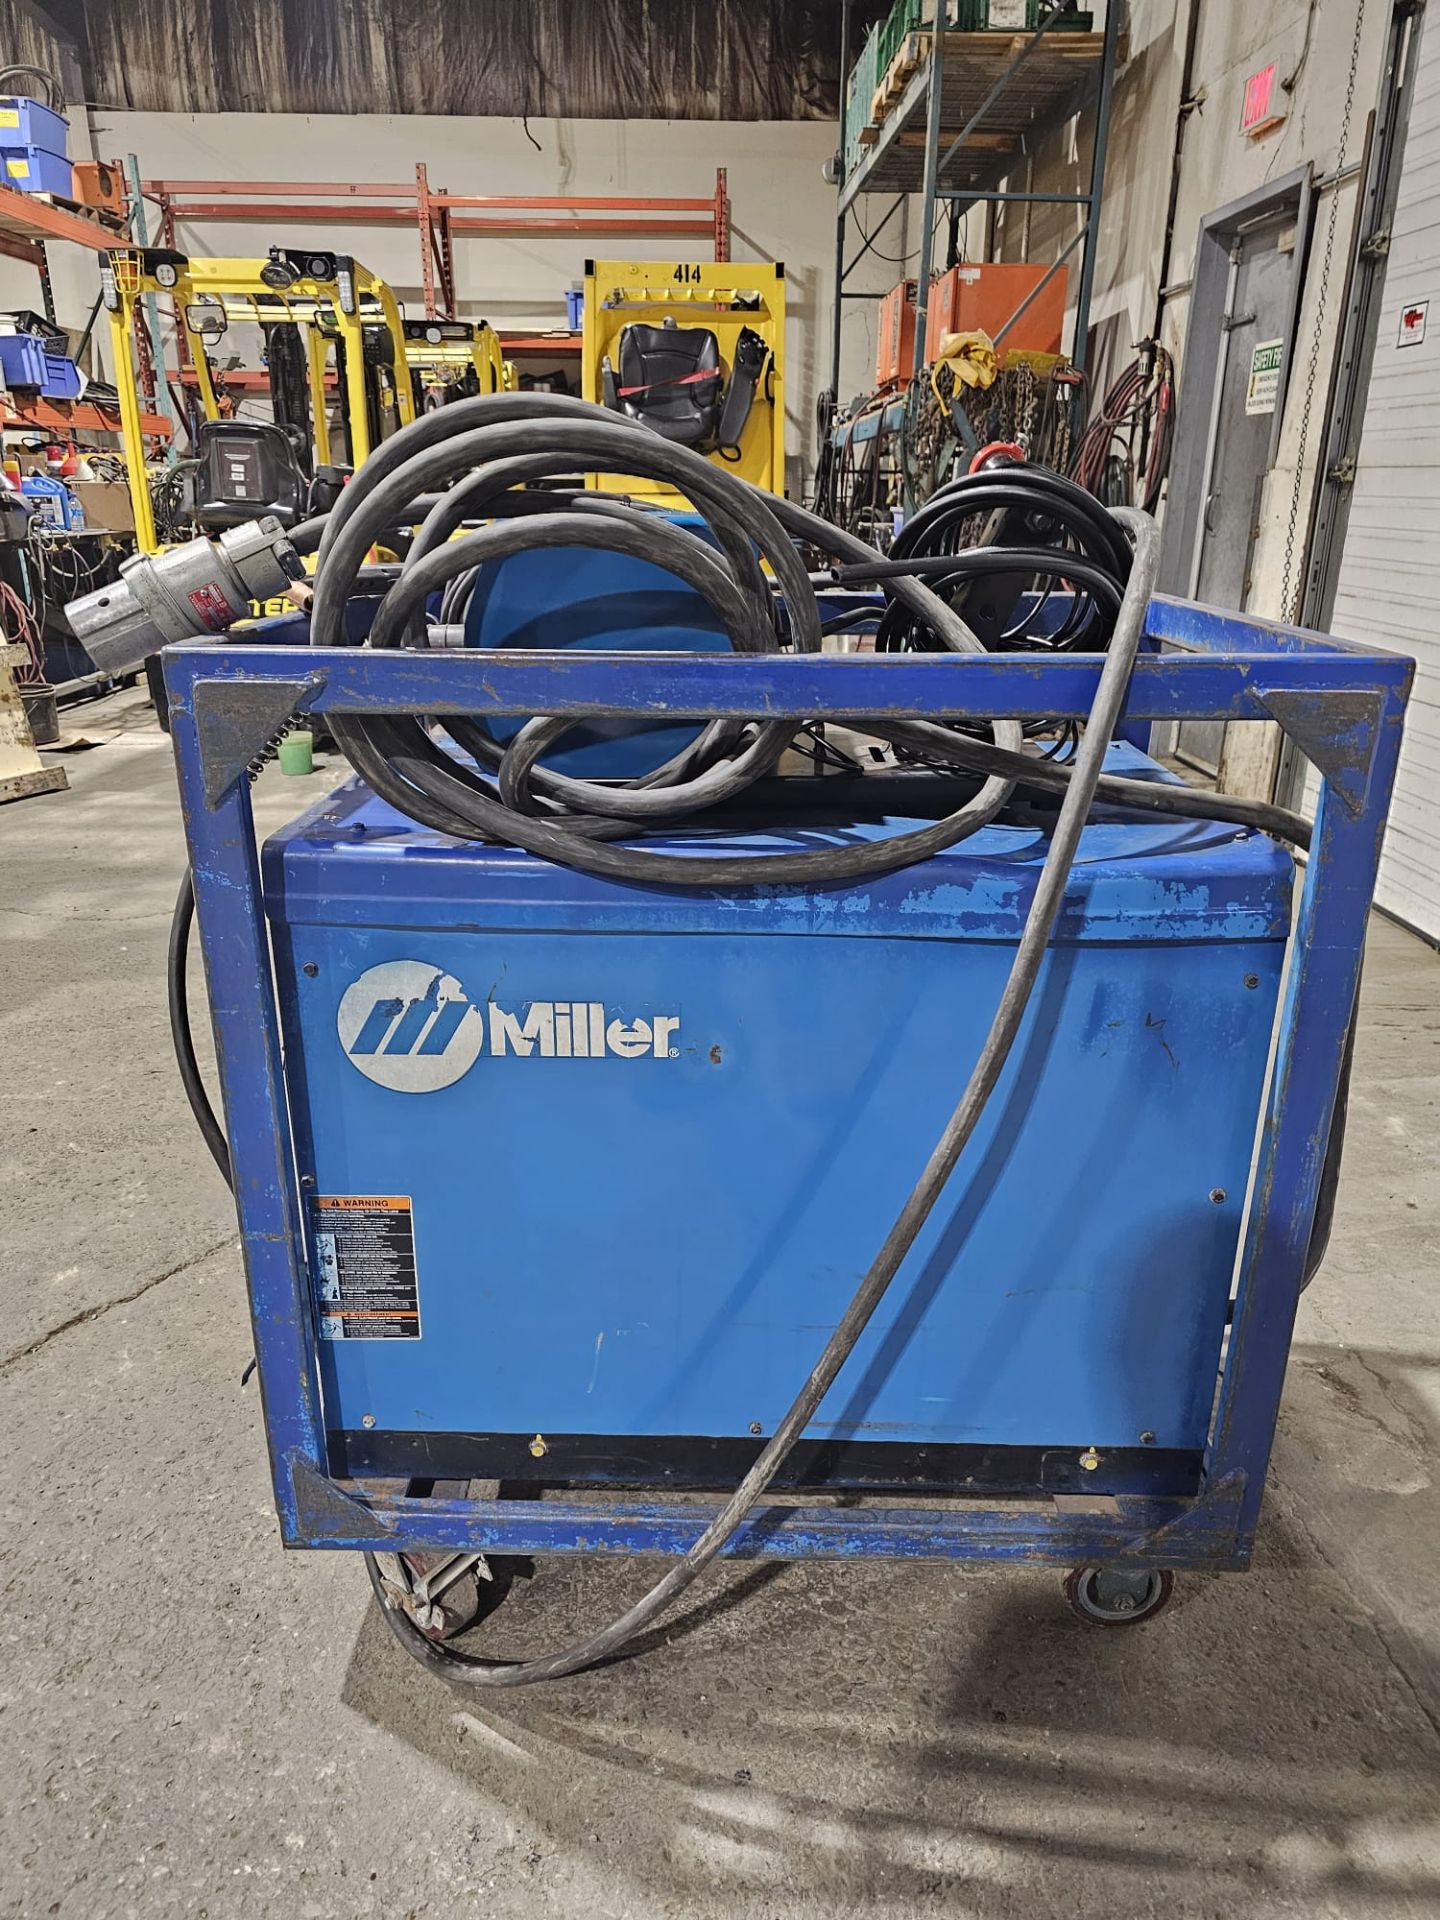 Miller Dimension 652 Mig Welder 650 Amp Mig Tig Stick Multi Process Power Source with 22A Wire - Image 3 of 10